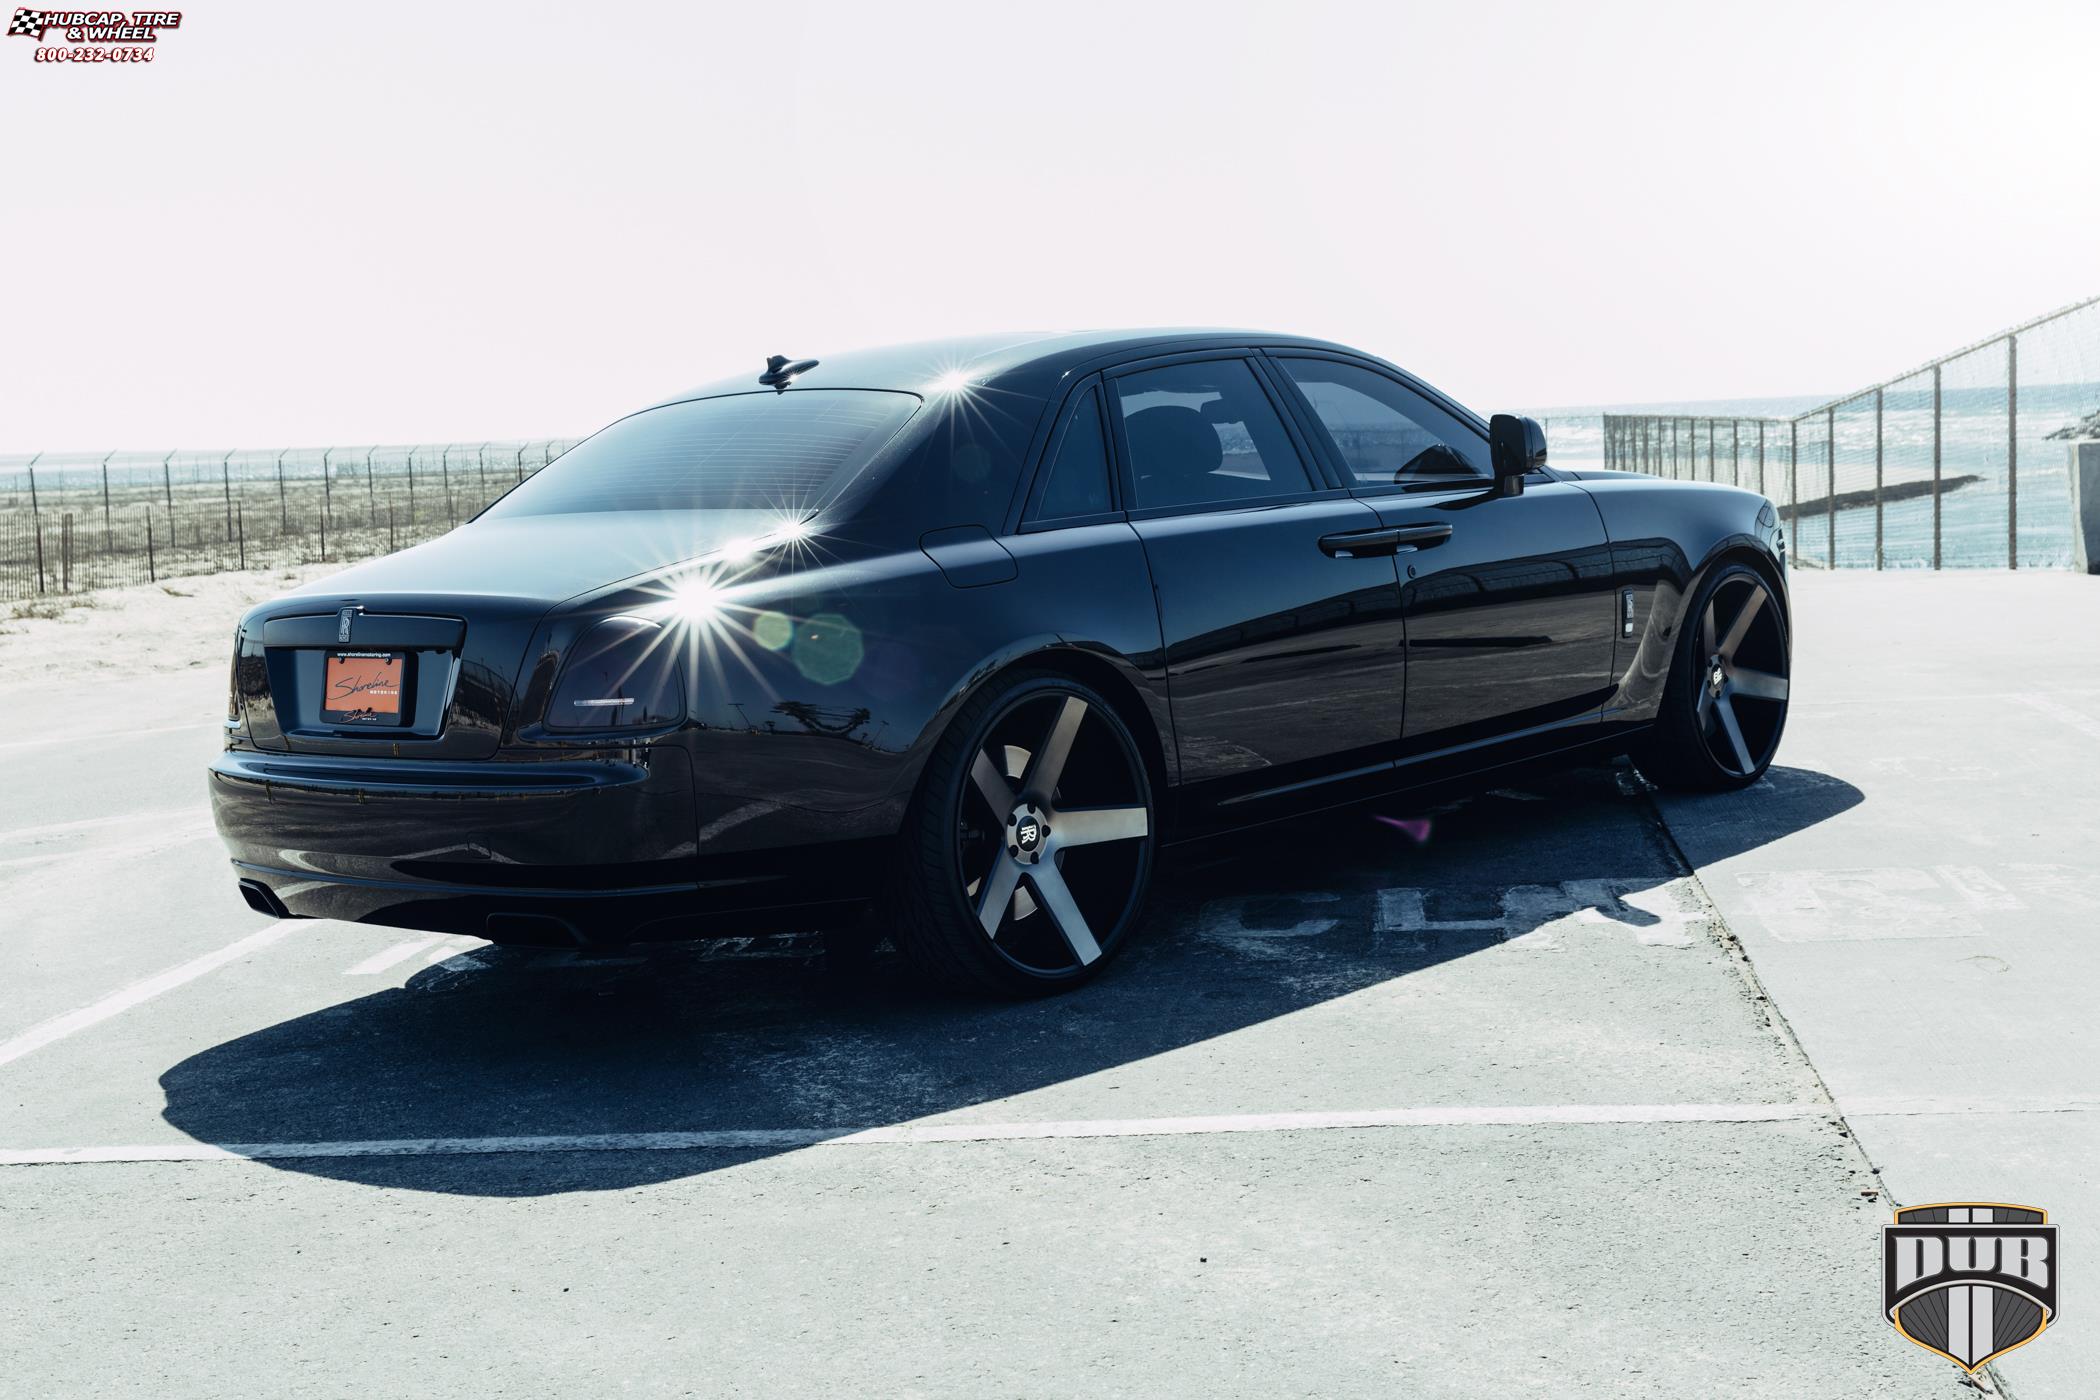 vehicle gallery/rolls royce ghost dub baller s116 24X10  Black & Machined with Dark Tint wheels and rims